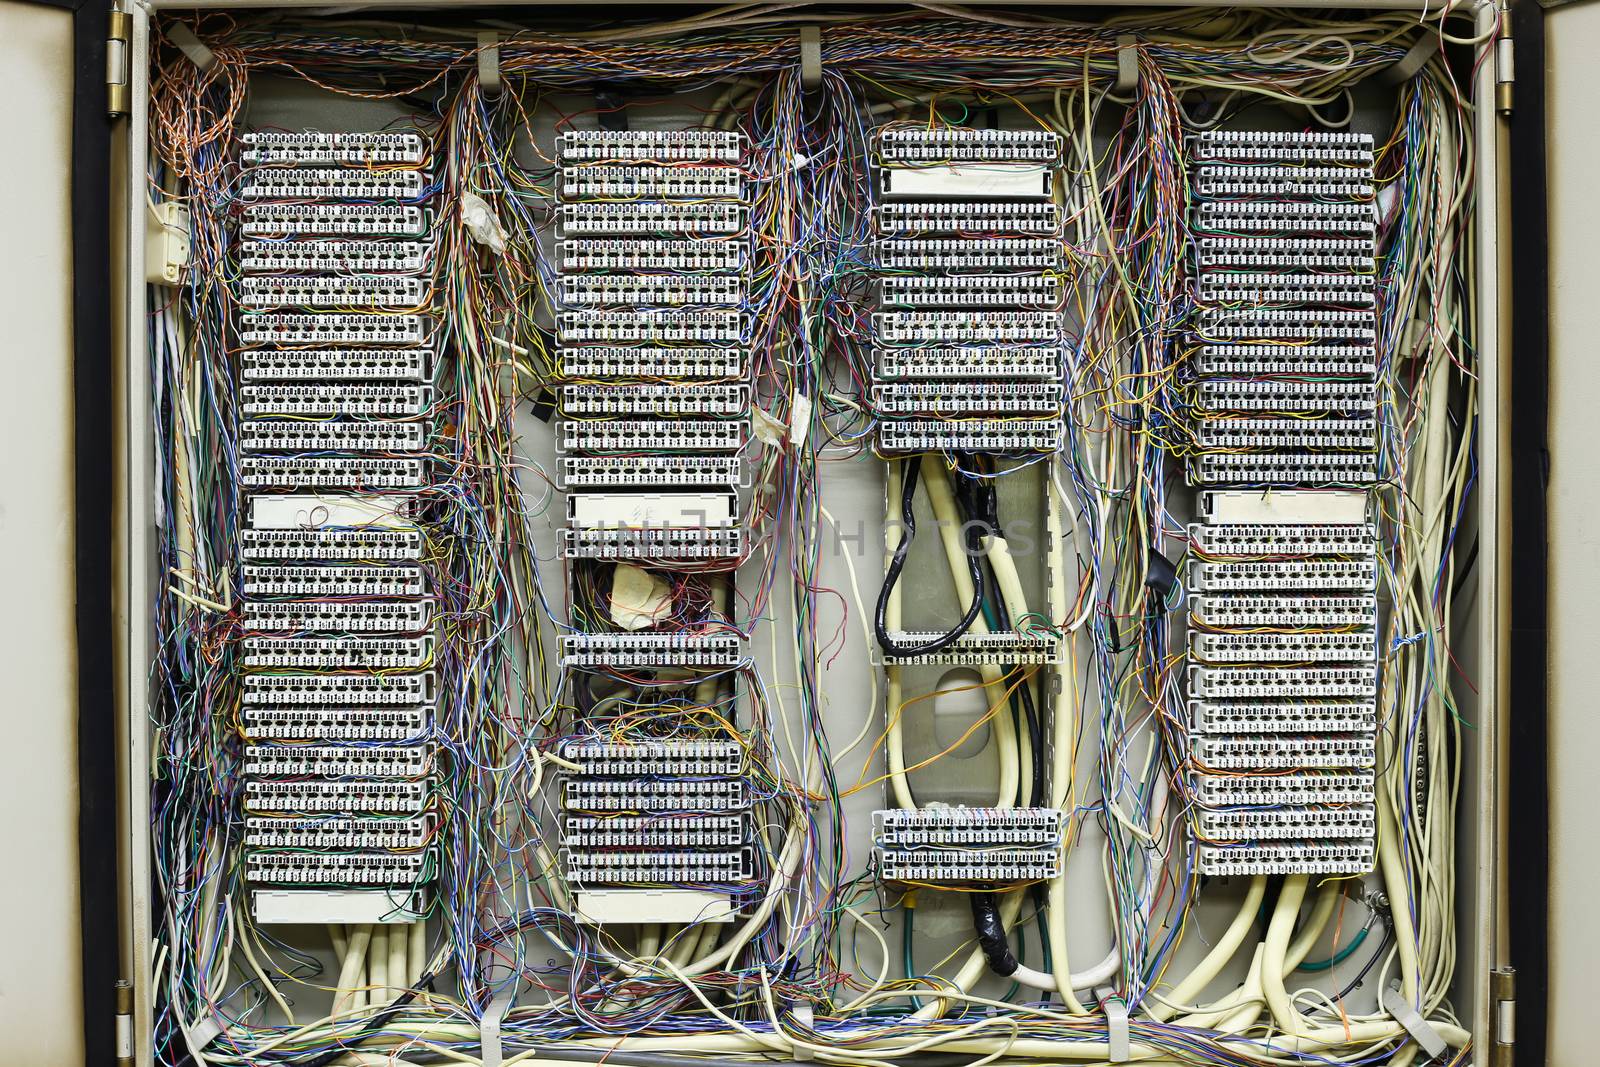 Communication control circuit panel used for phones by powerbeephoto